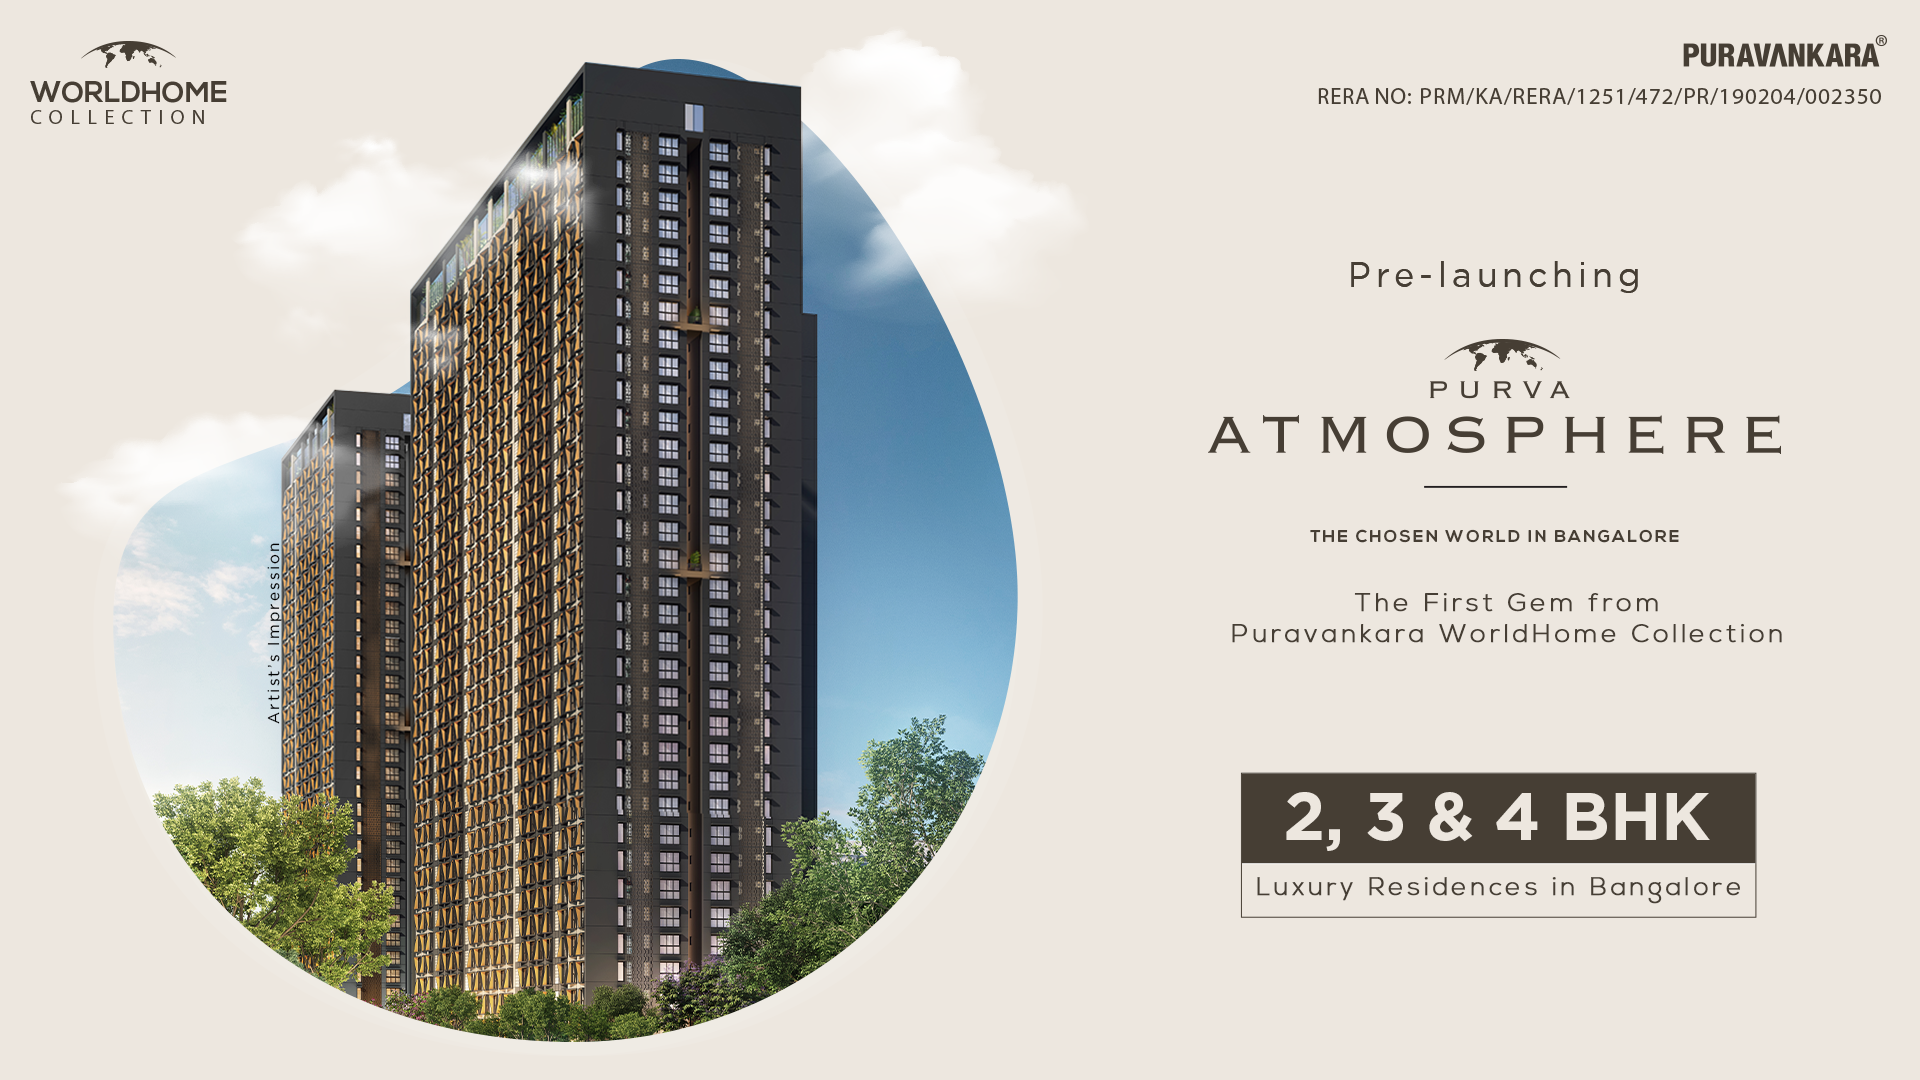 2, 3 & 4 bed luxury residences starting at Rs. 95 Lakh at  Purva Atmosphere in Bangalore Update